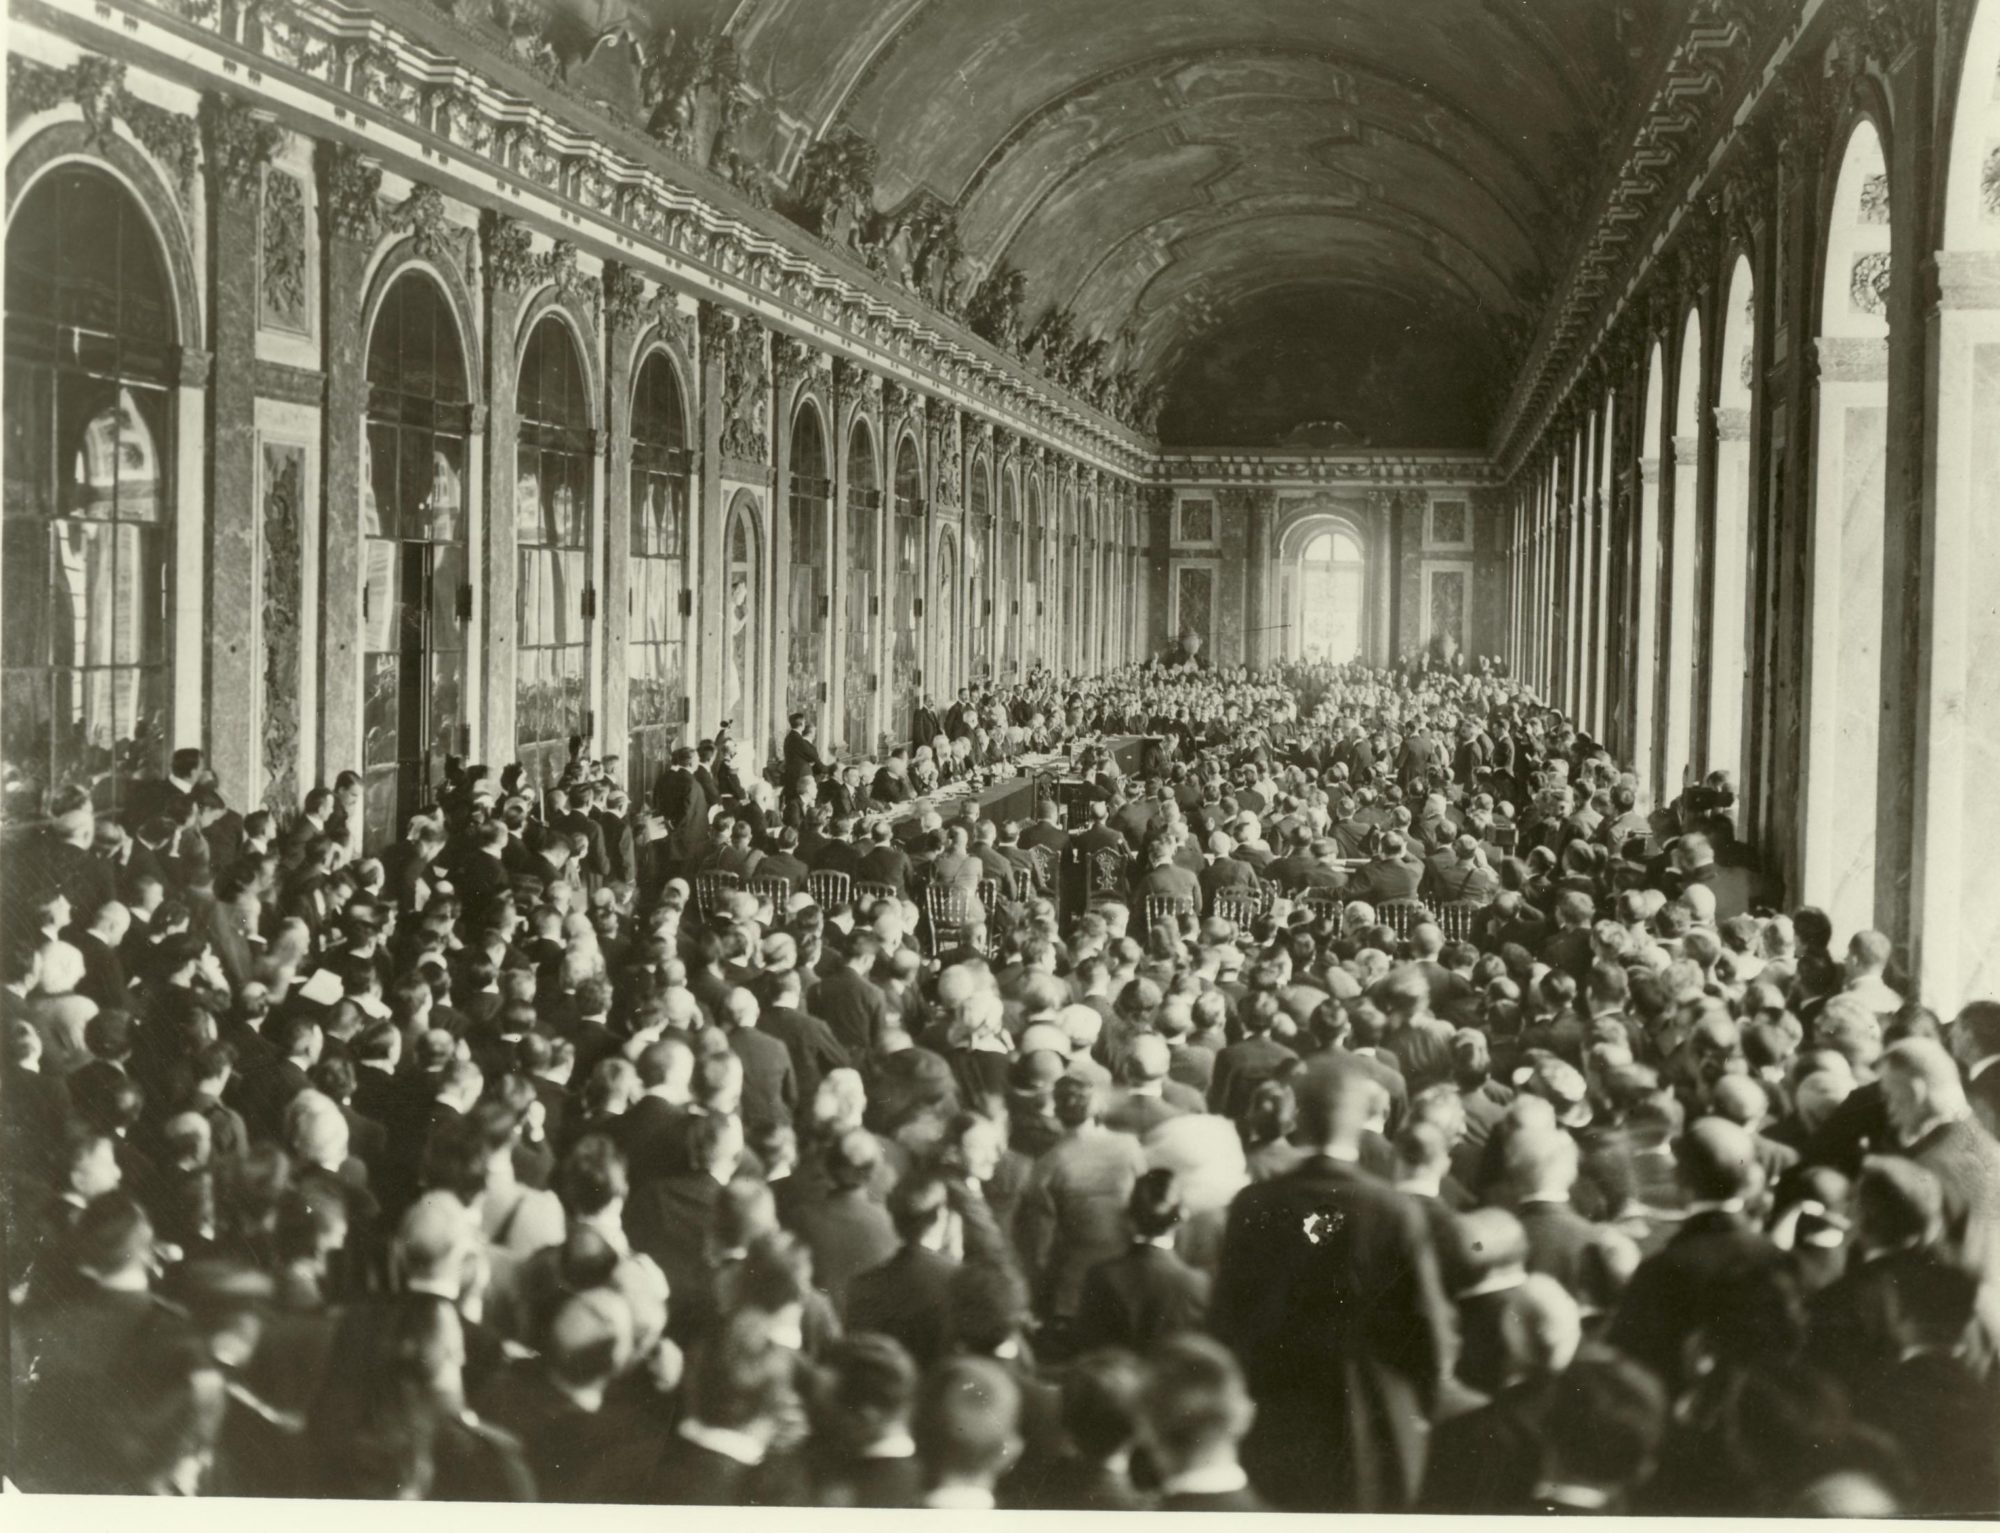 The Treaty of Versailles and Religious Freedom